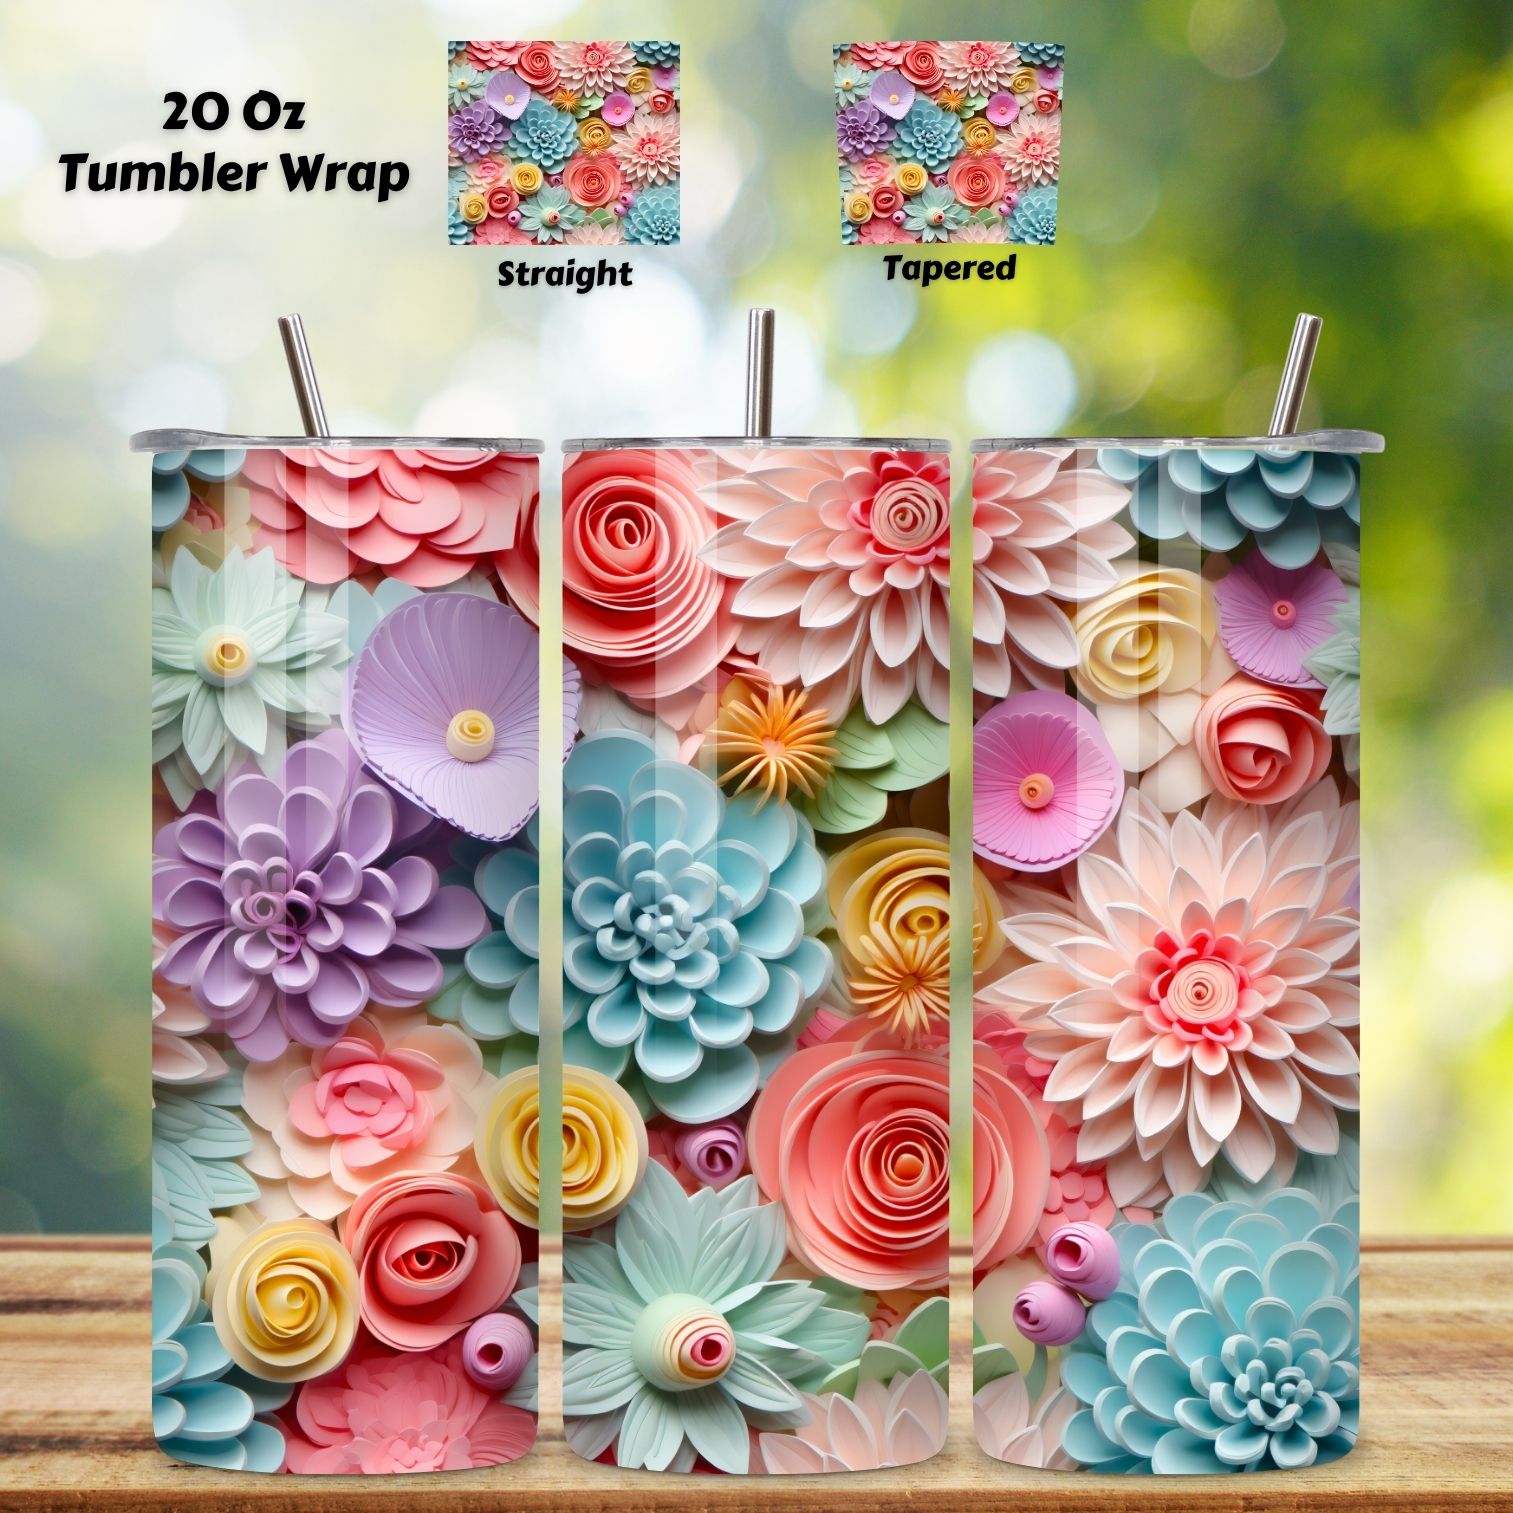 Pastel Flowers 3D Tumbler Wrap, Eclectic Floral Pattern for Flower Lover, Straight and Tapered Tumbler Wrap PNG cover image.